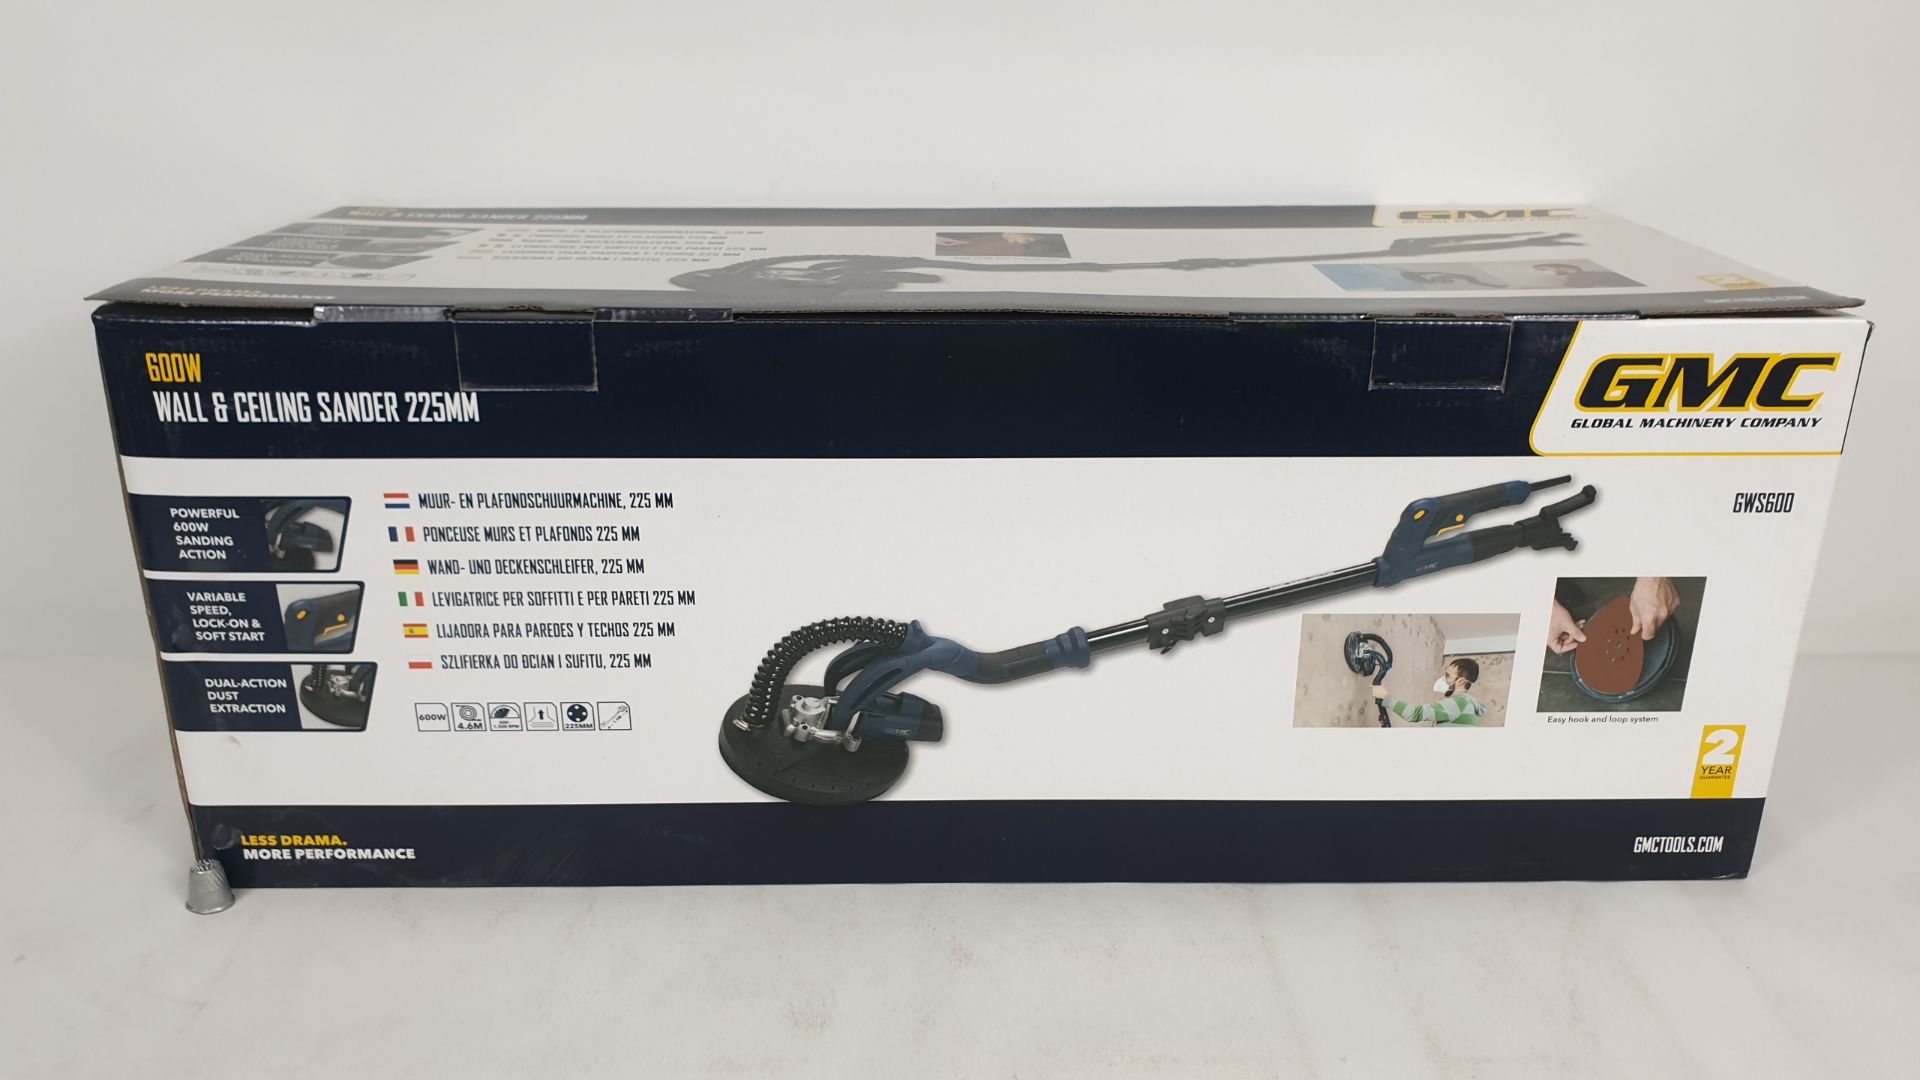 GMC 600W WALL & CEILING SANDER 225M (PRODUCT CODE 264803) - (WITH 2 YEAR MANUFACTURERS GUARANTEE)